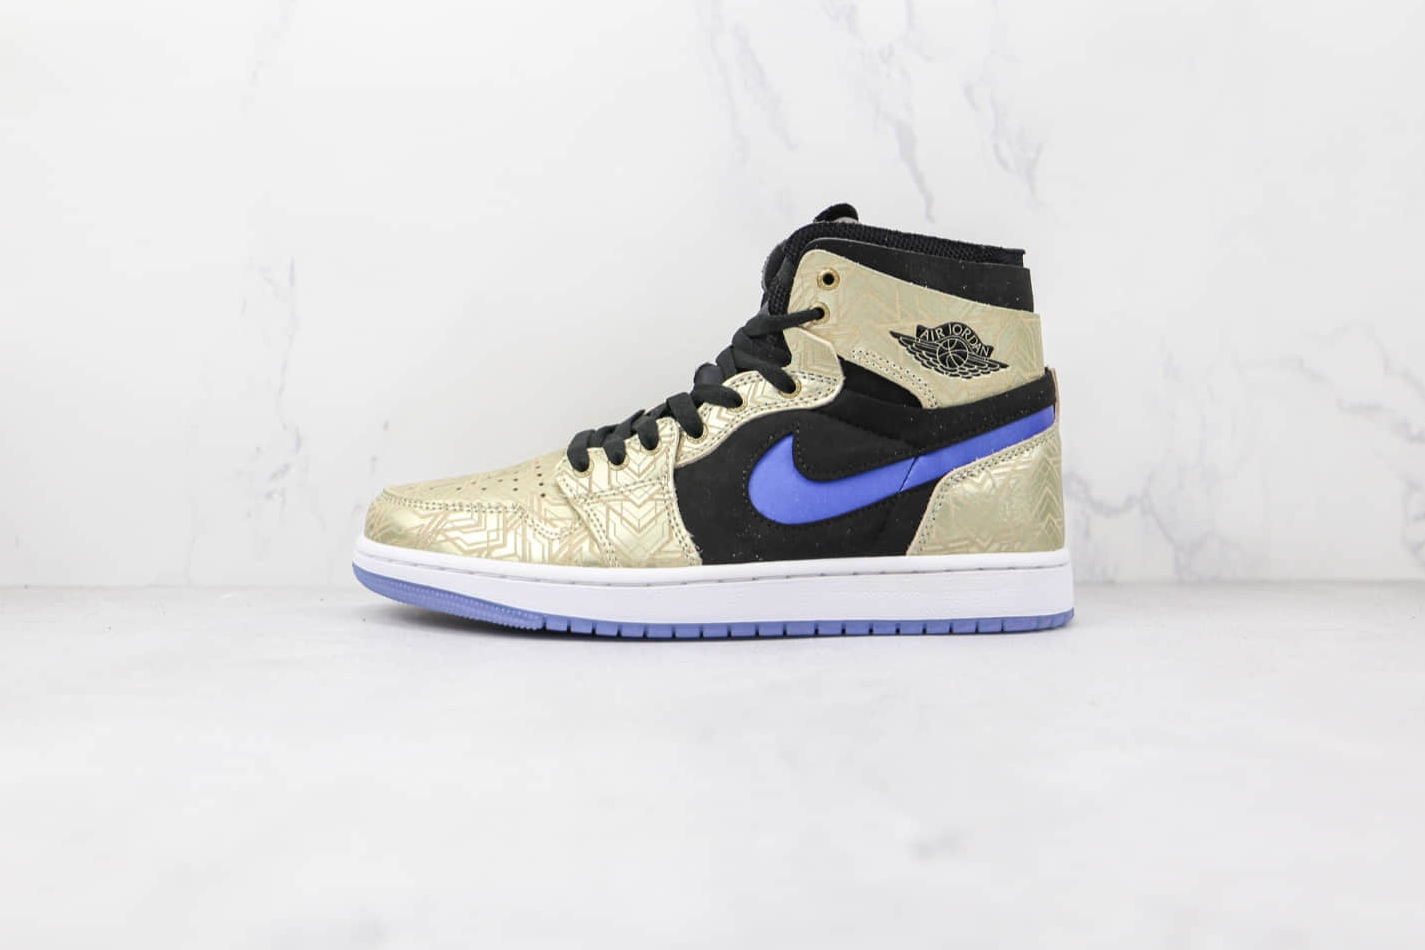 Air Jordan 1 Zoom Comfort 'Gold Laser' DQ0659-700 - Stylish and Comfortable Shoes | Limited Stock